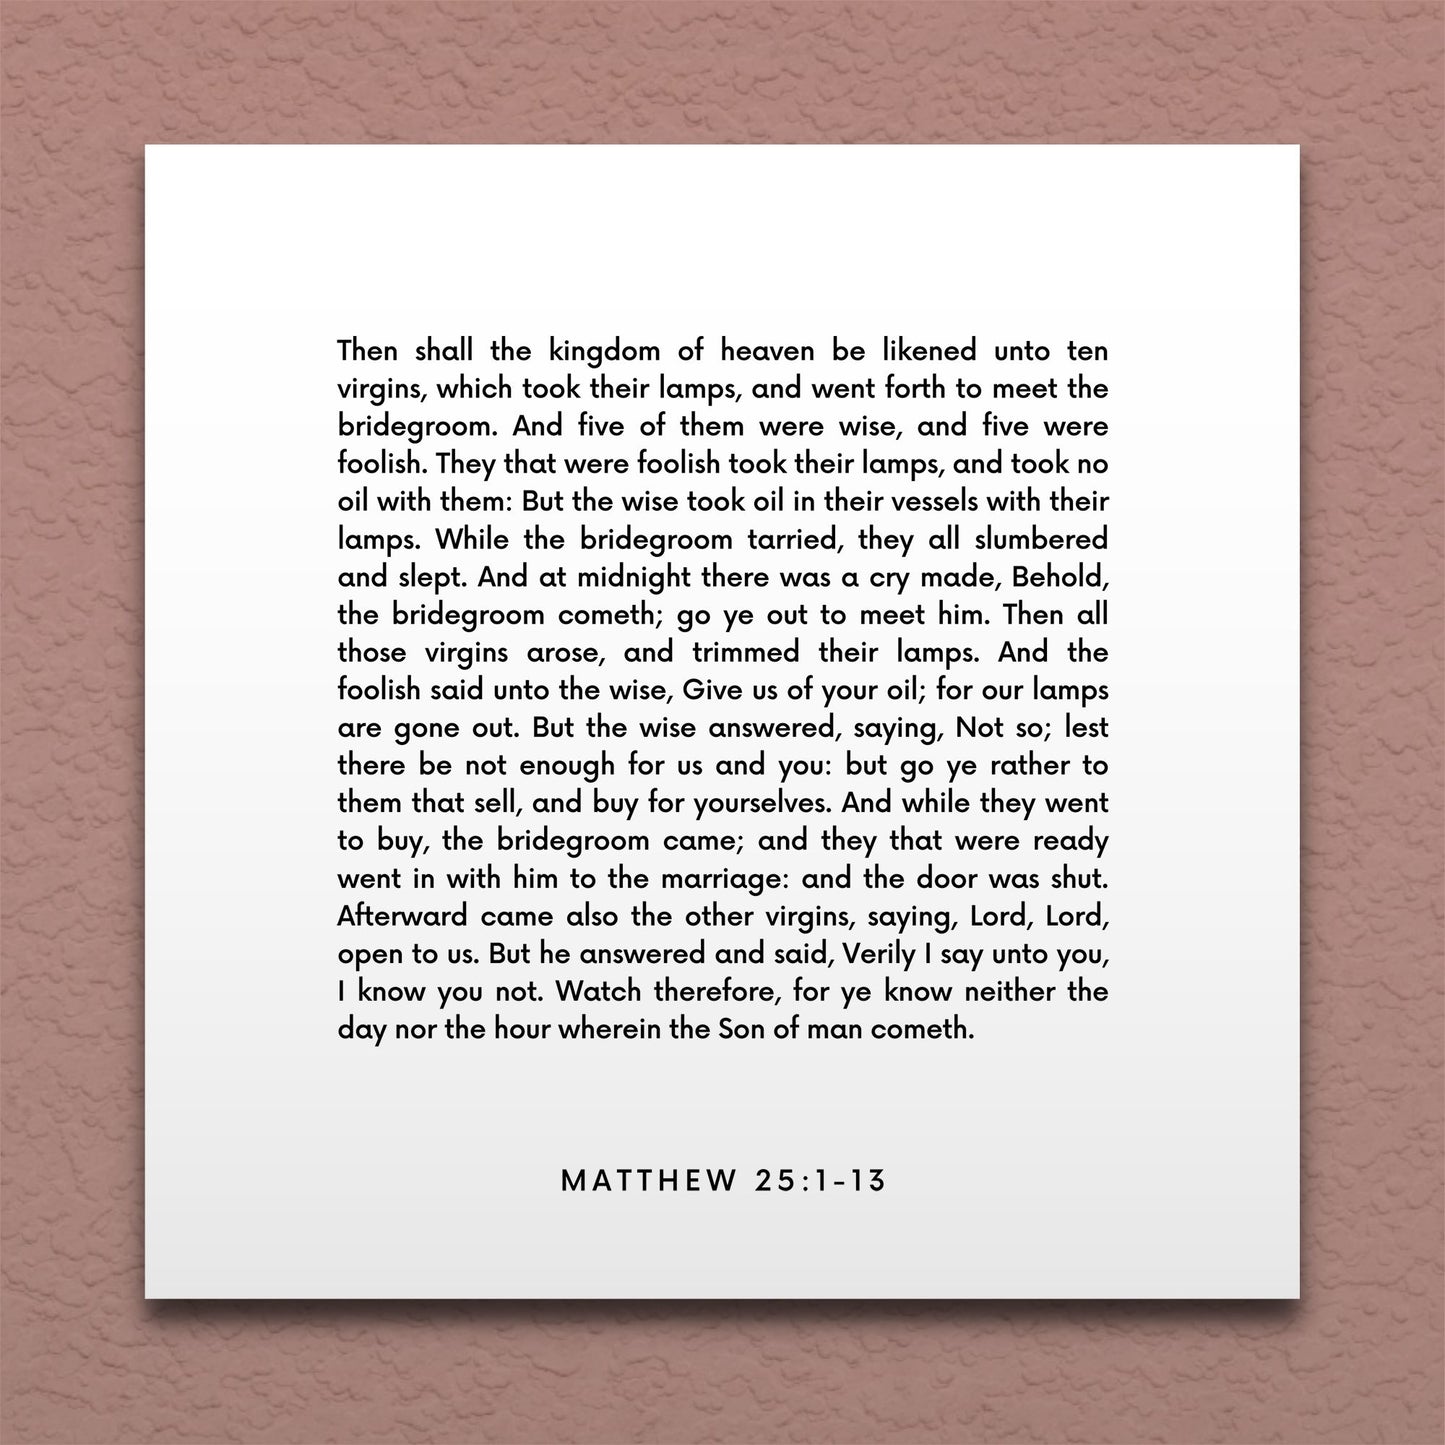 Wall-mounted scripture tile for Matthew 25:1-13 - "Five of them were wise"